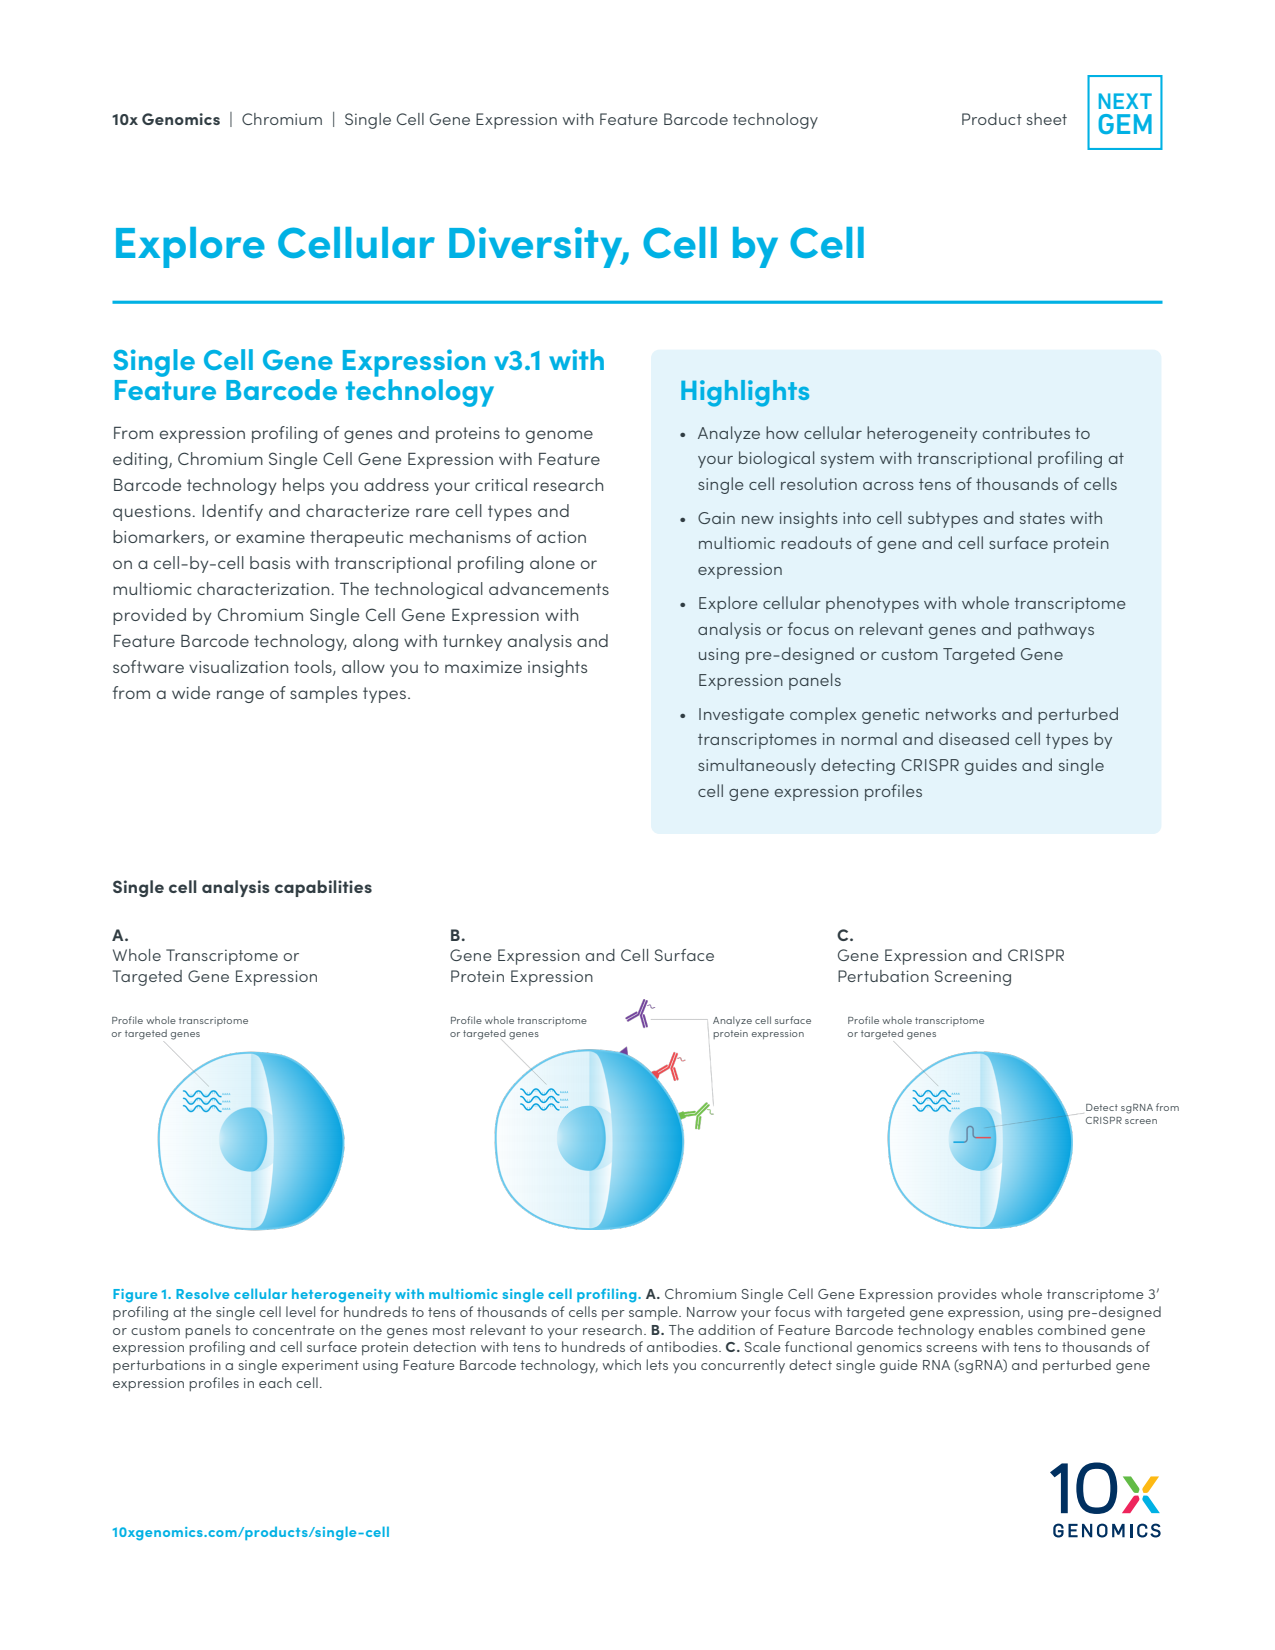 Chromium Single Cell Gene Expression Solution v3.1 Dual Index Product Sheet